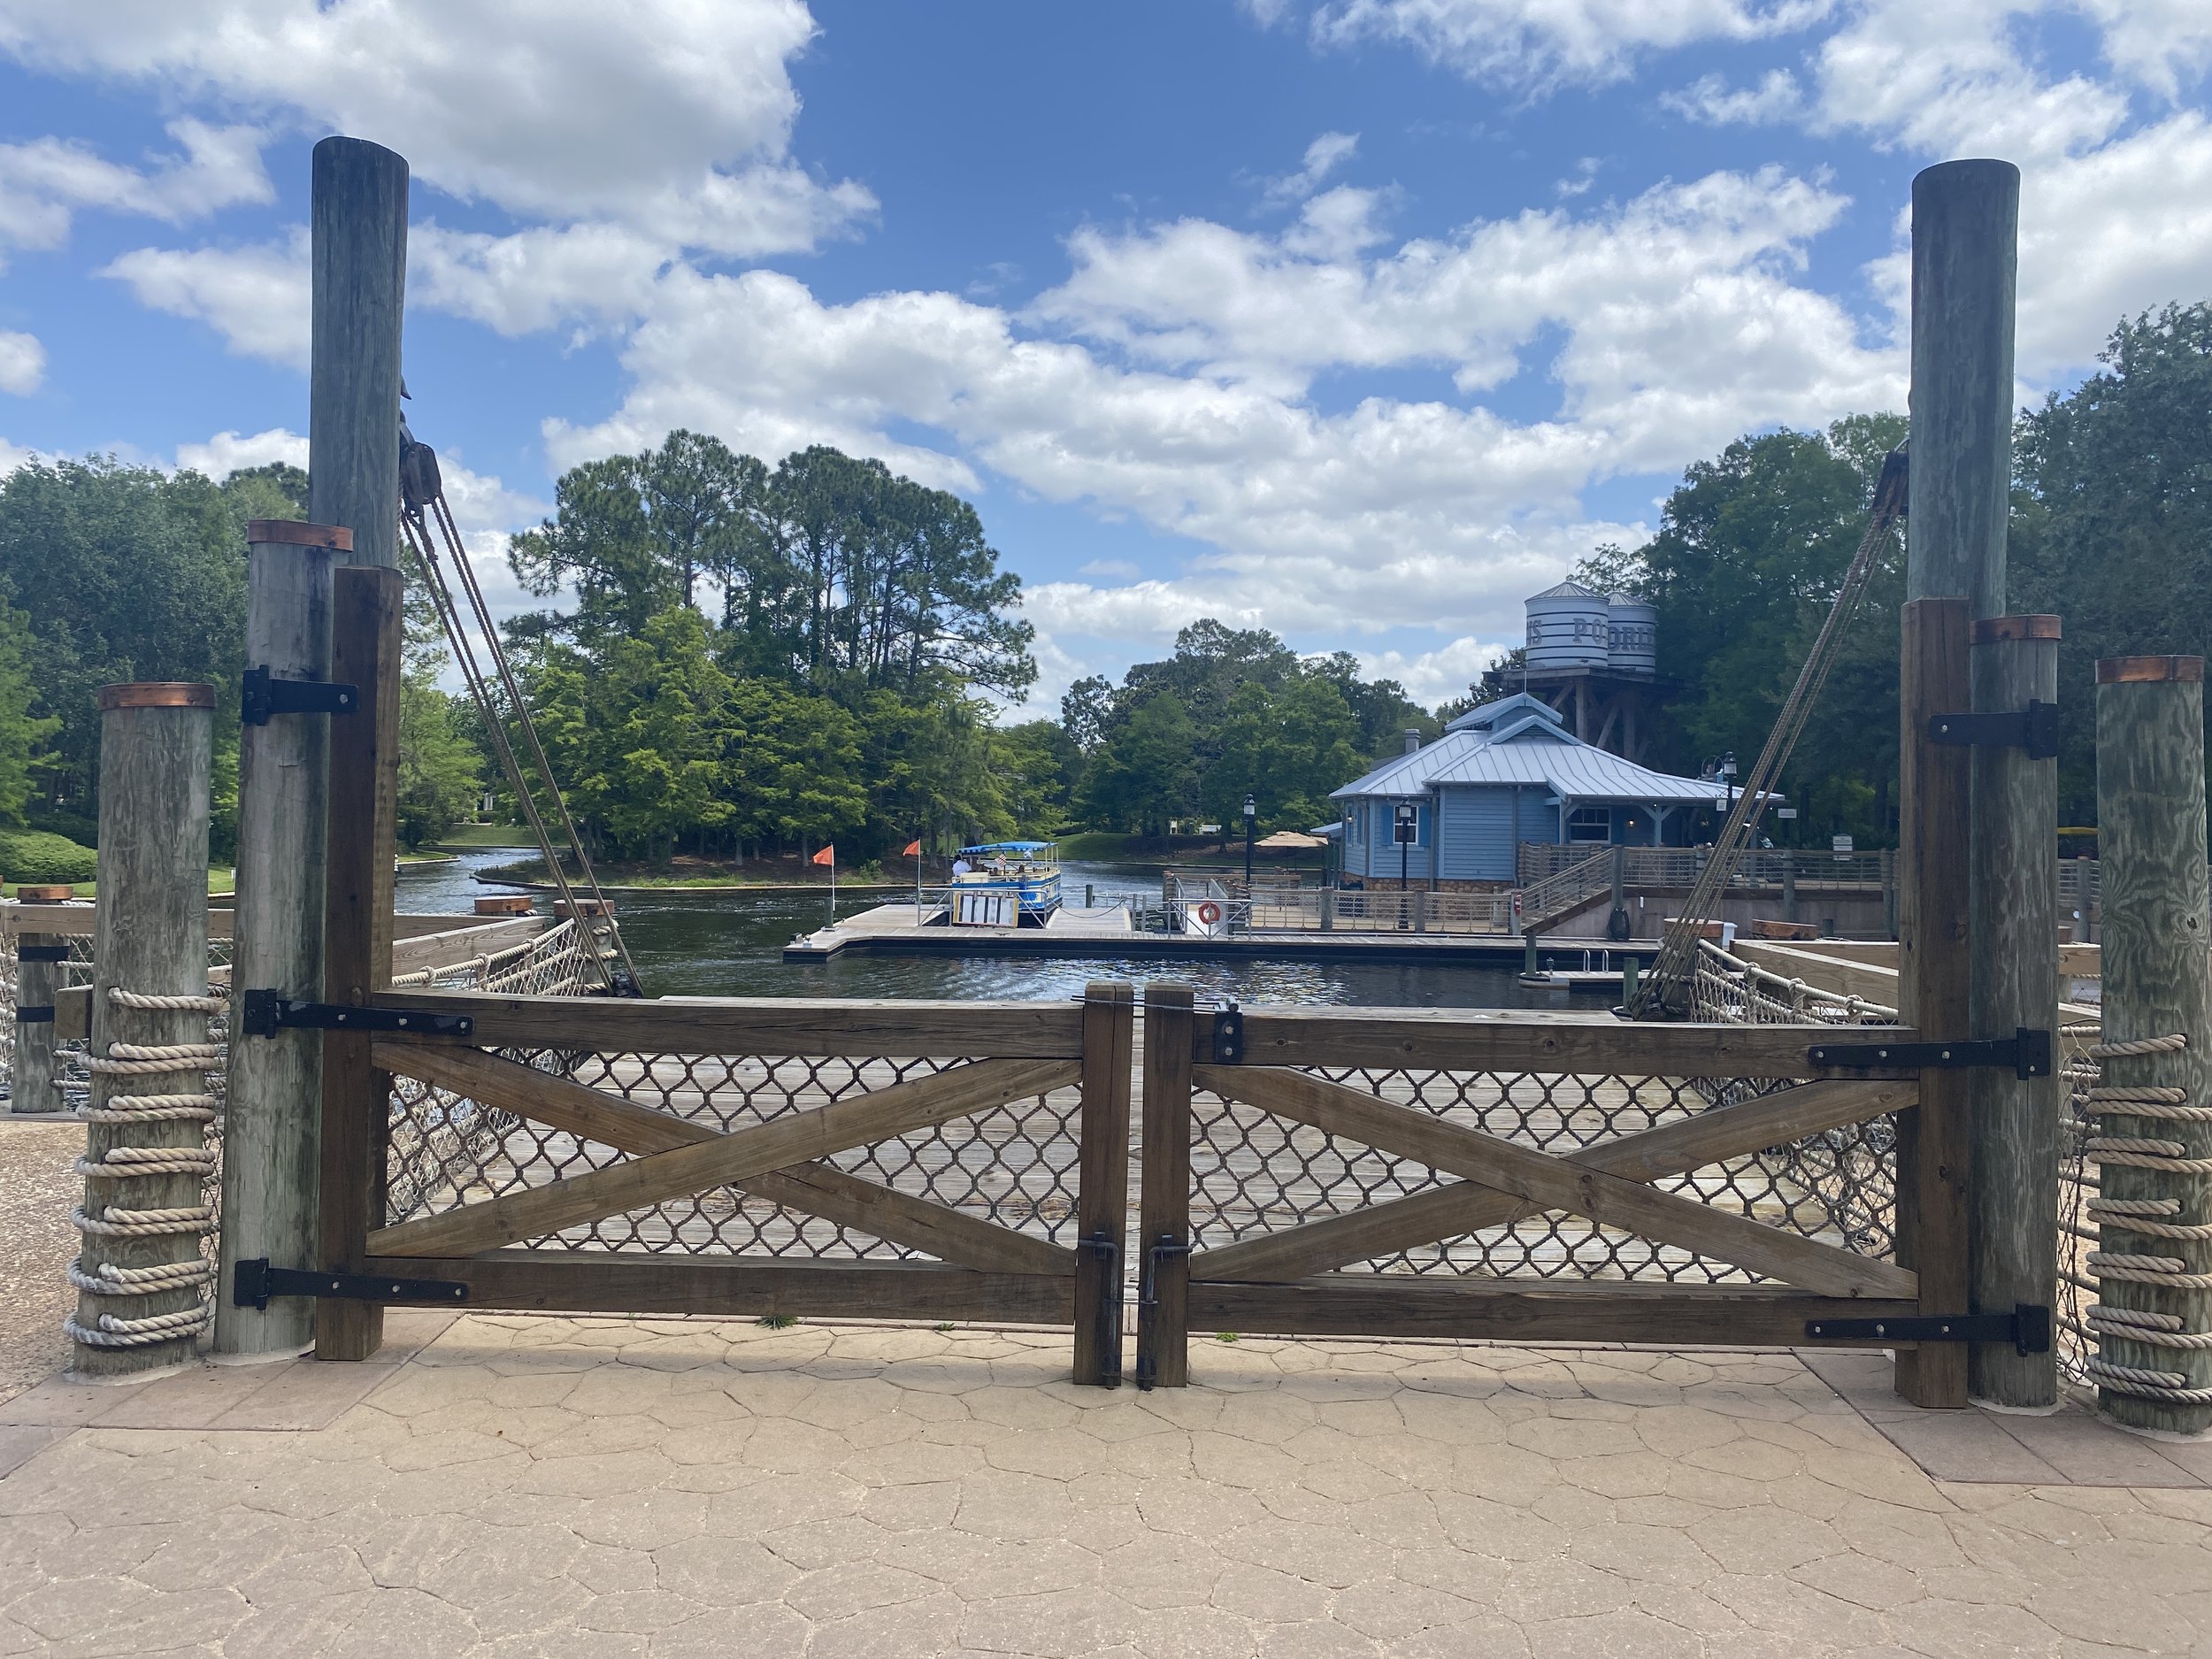  then through this dock, and into the water. Details like this help tell the story that Port Orleans Riverside is a working port town on the Sassagoula River.  